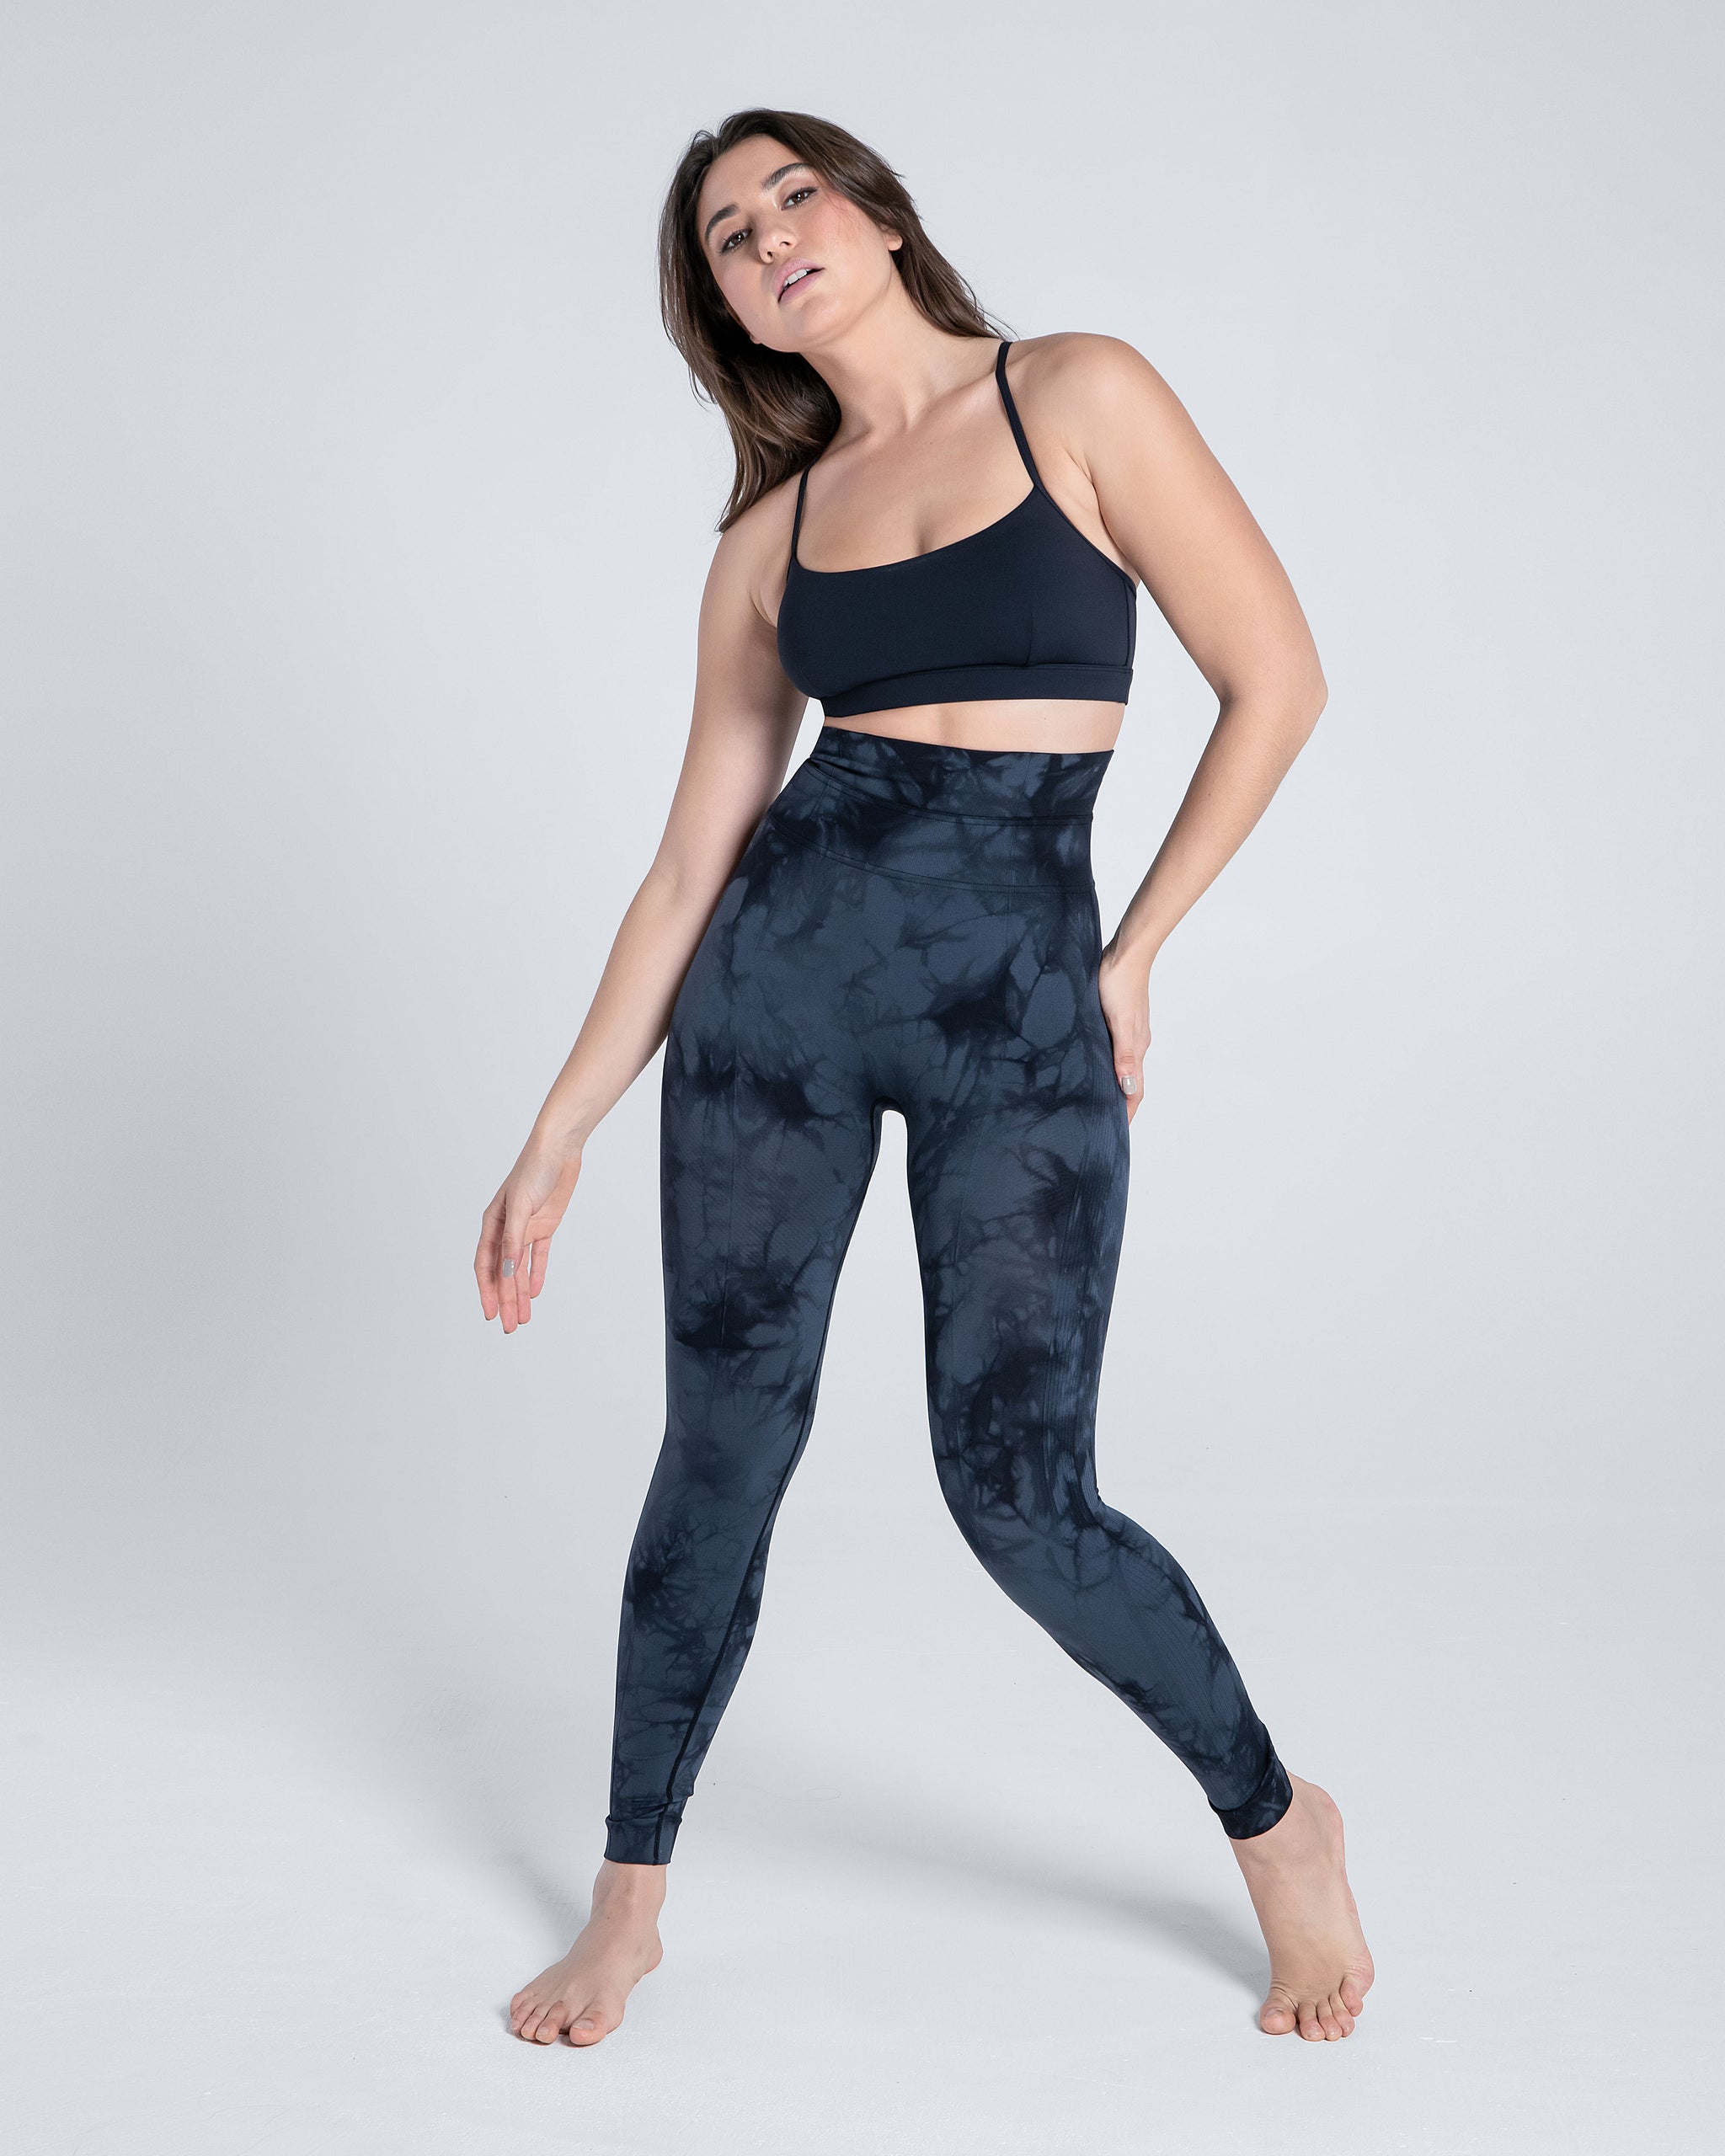 Cosmolle Yoga Suits and High-Waist Leggings: A Great Way to Stretch Out  Your Day